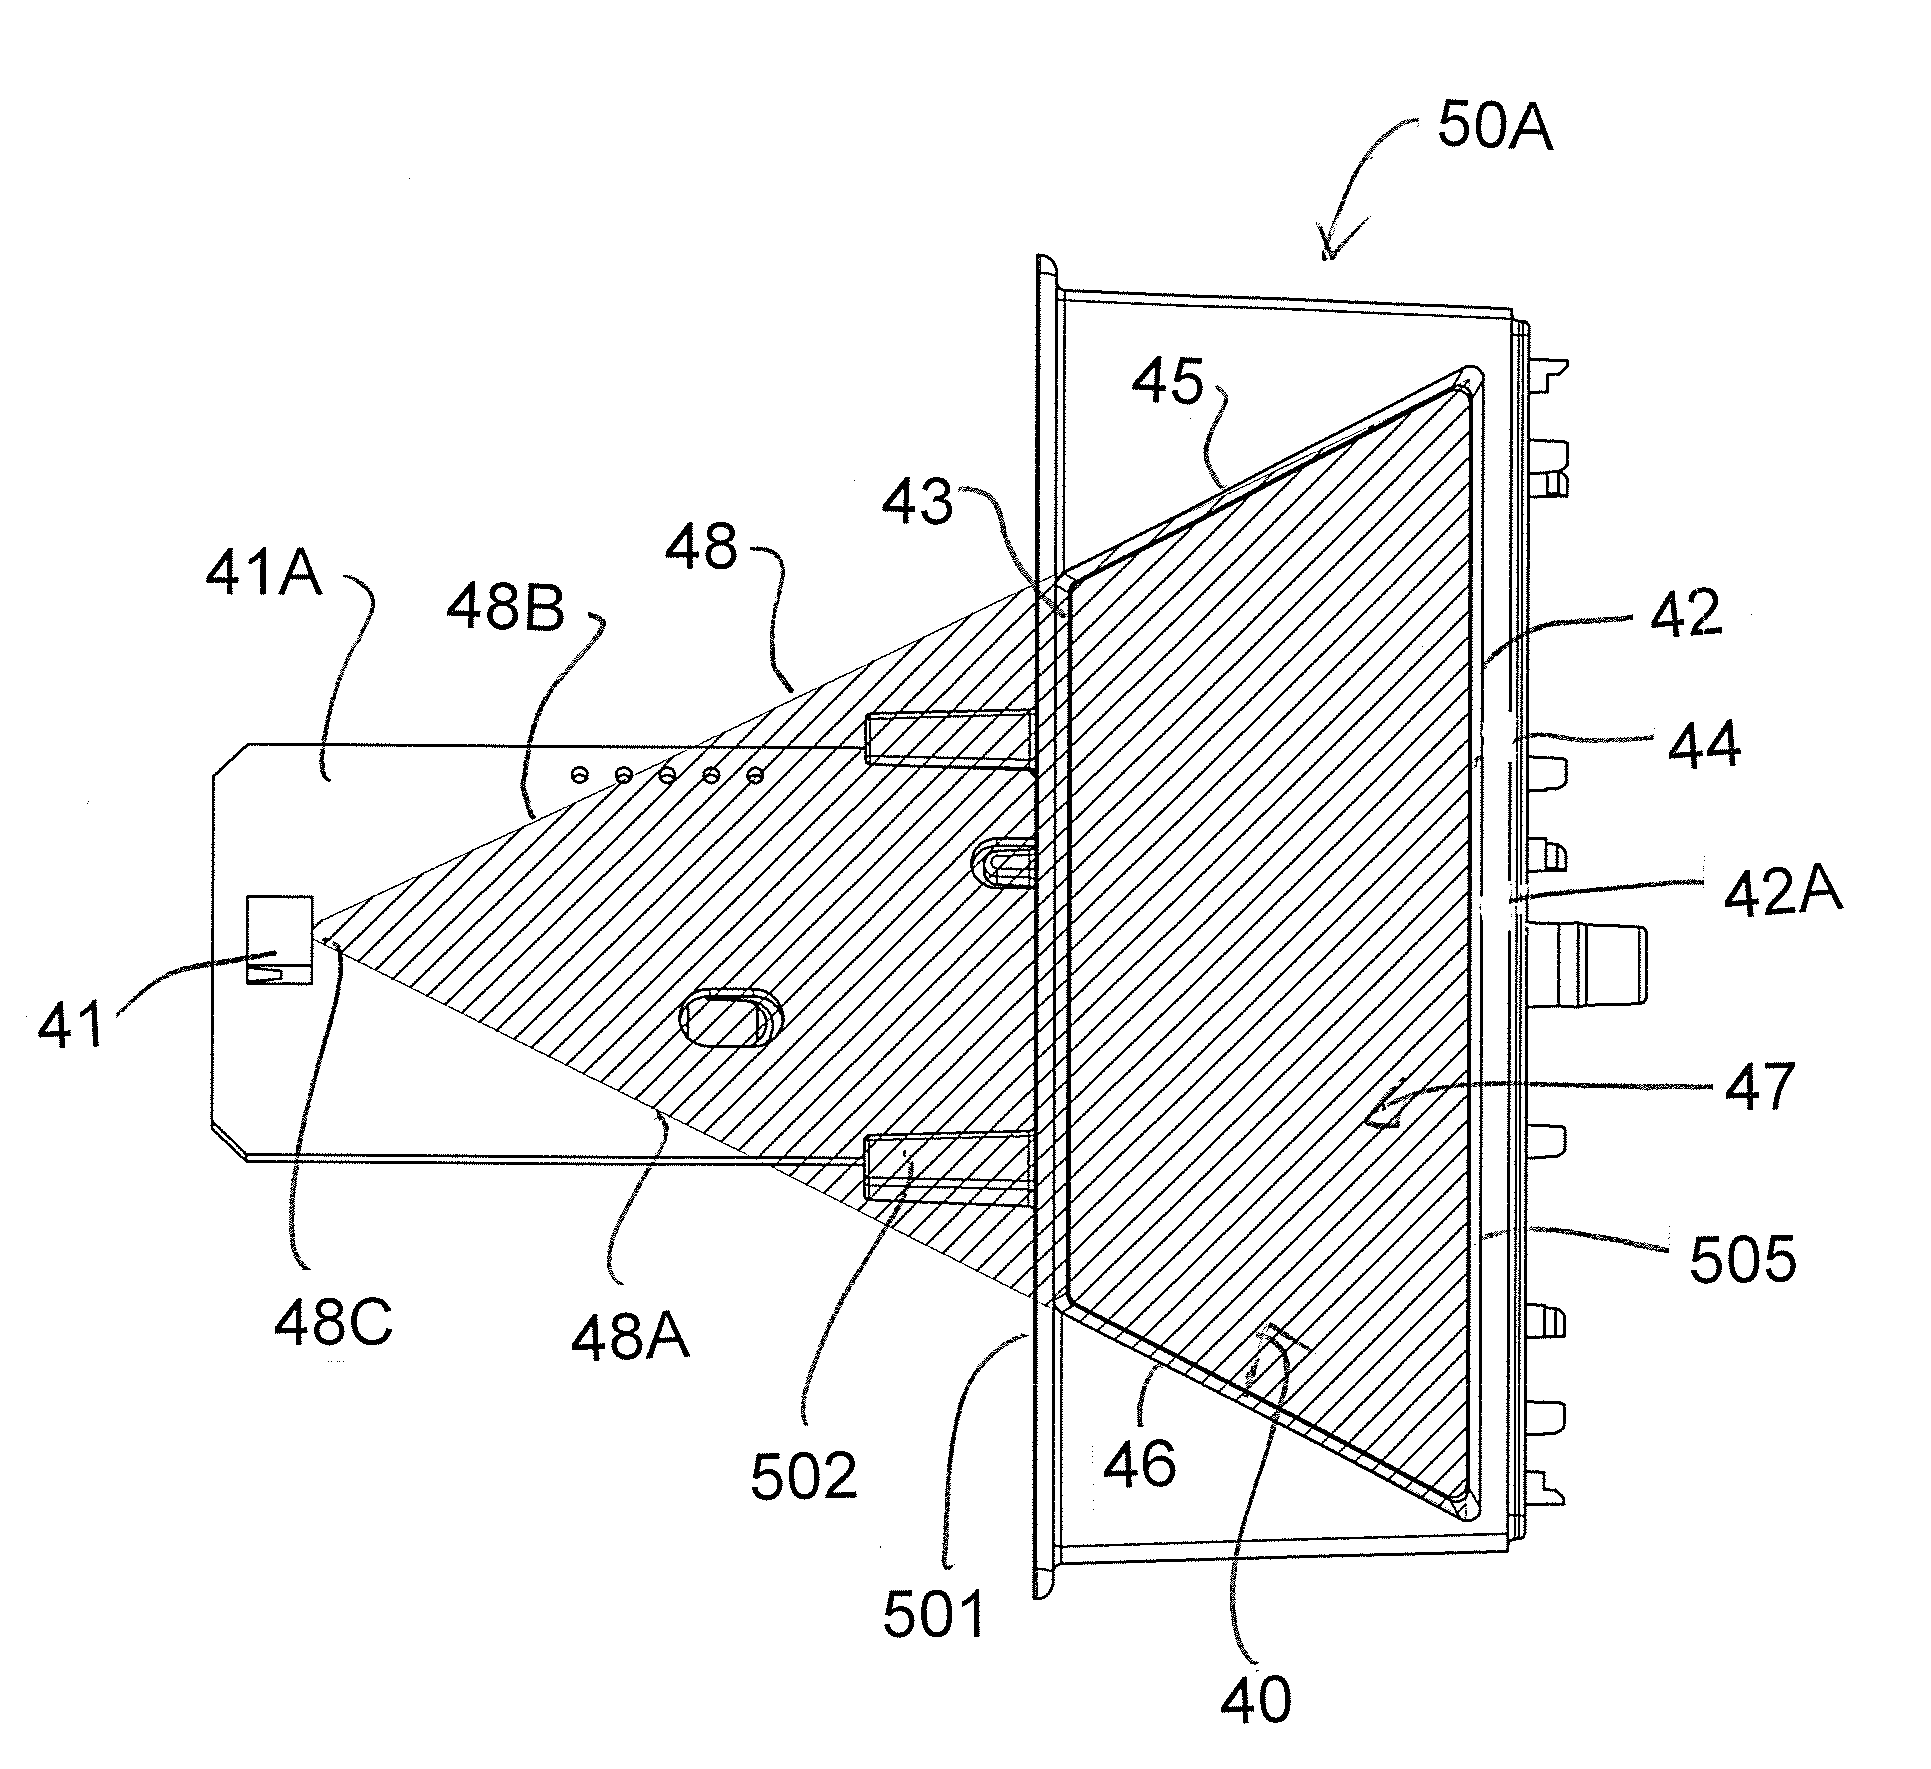 Arrangement of sensors in a seed counting apparatus for a planter monitor